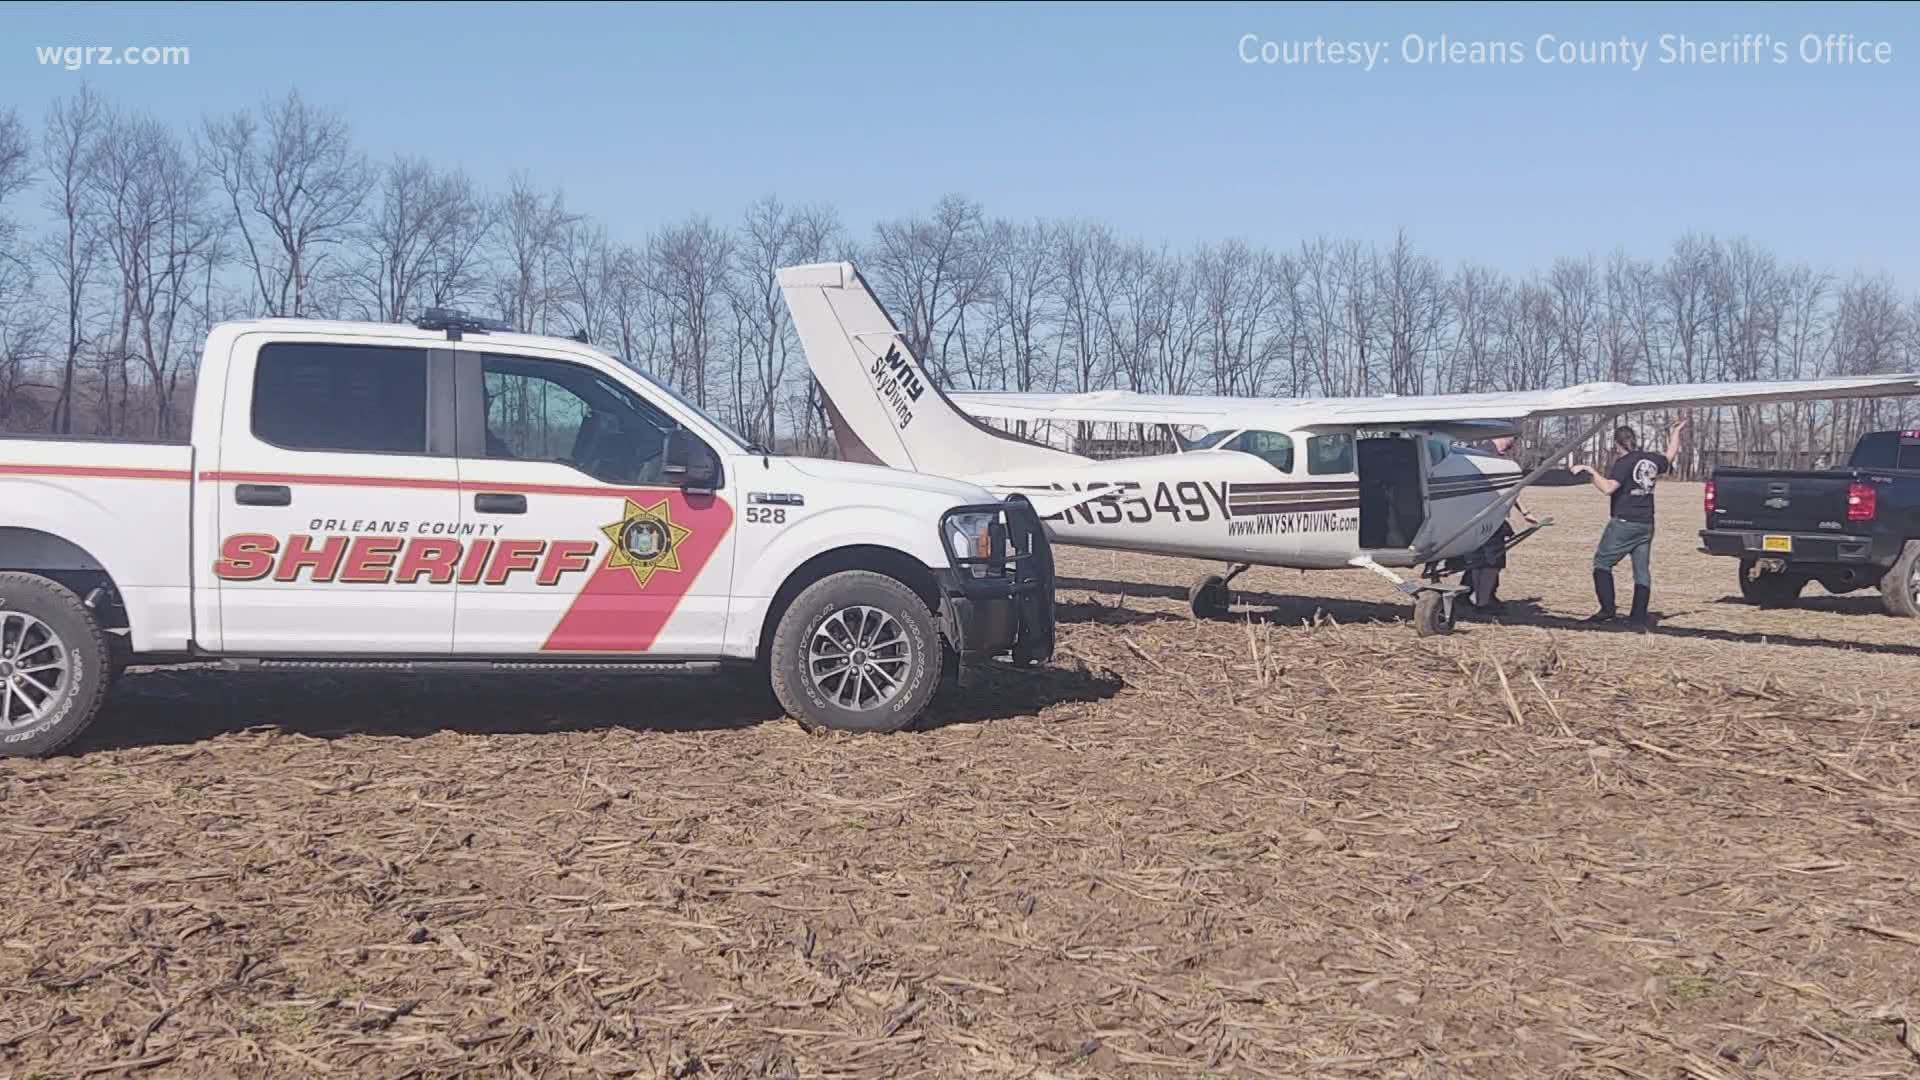 According to deputies, the Rochester pilot ran out of fuel shortly after he had two skydivers jump out and while heading back to land.